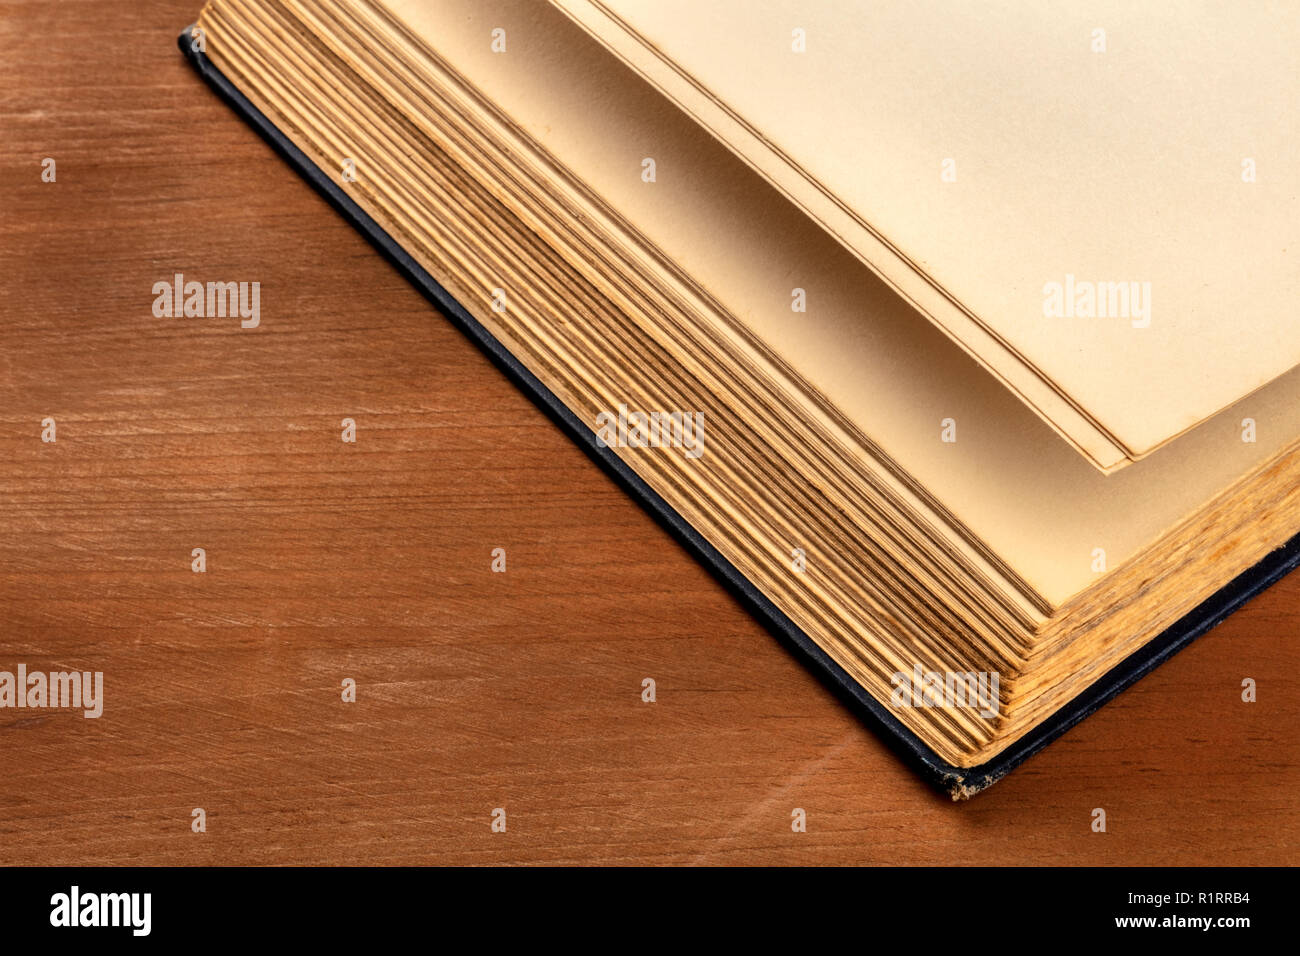 The pages of a thick old book on a dark rustic background with a place for text Stock Photo